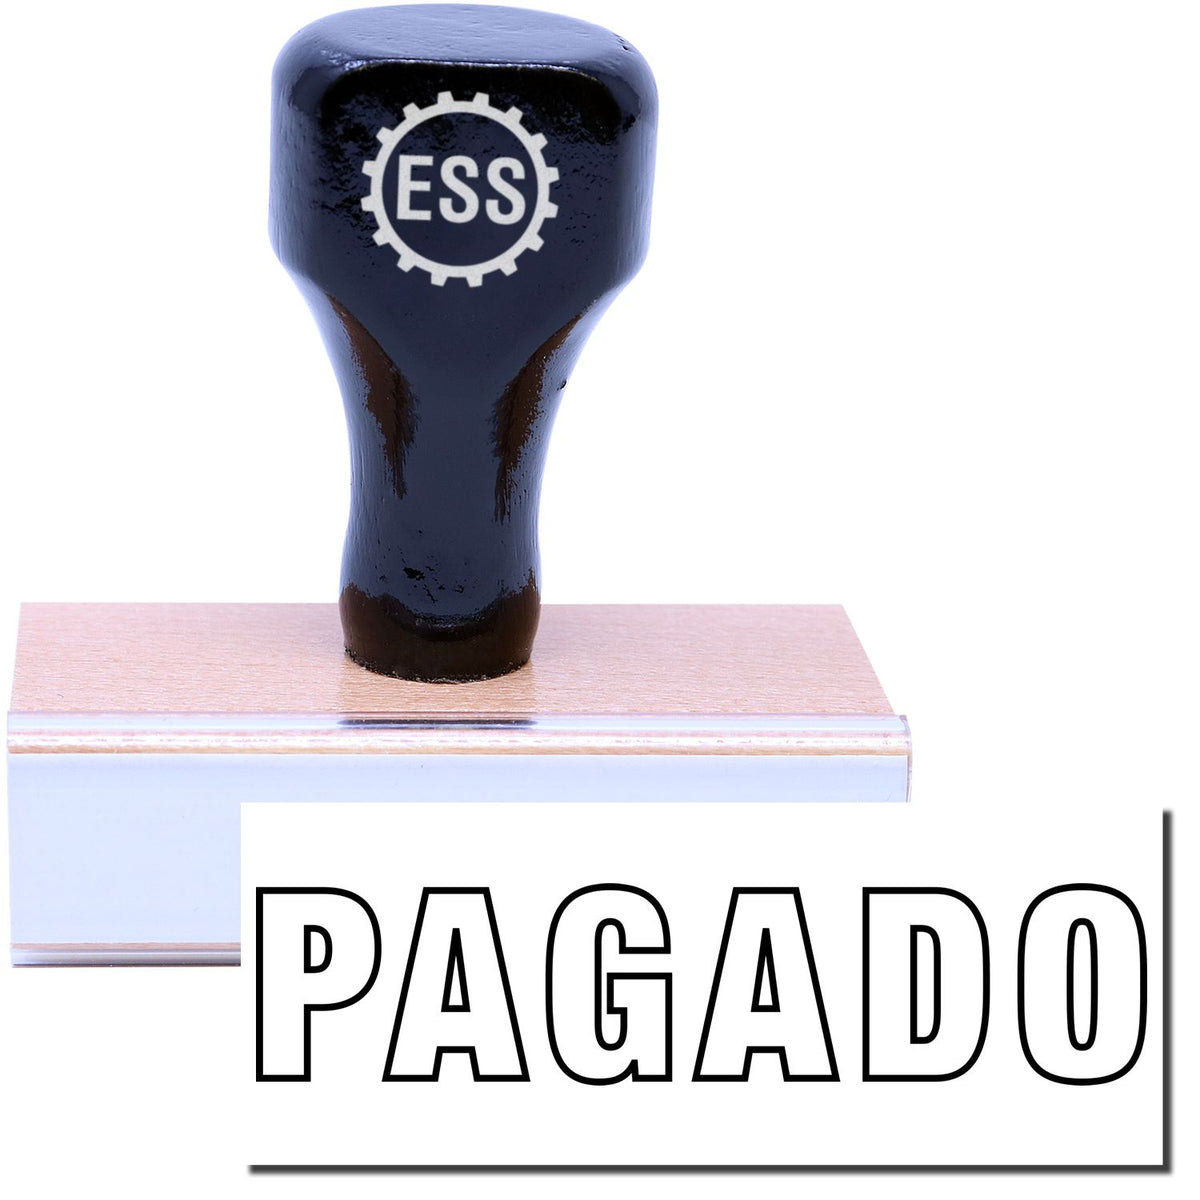 A stock office rubber stamp with a stamped image showing how the text &quot;PAGADO&quot; in an outline font is displayed after stamping.